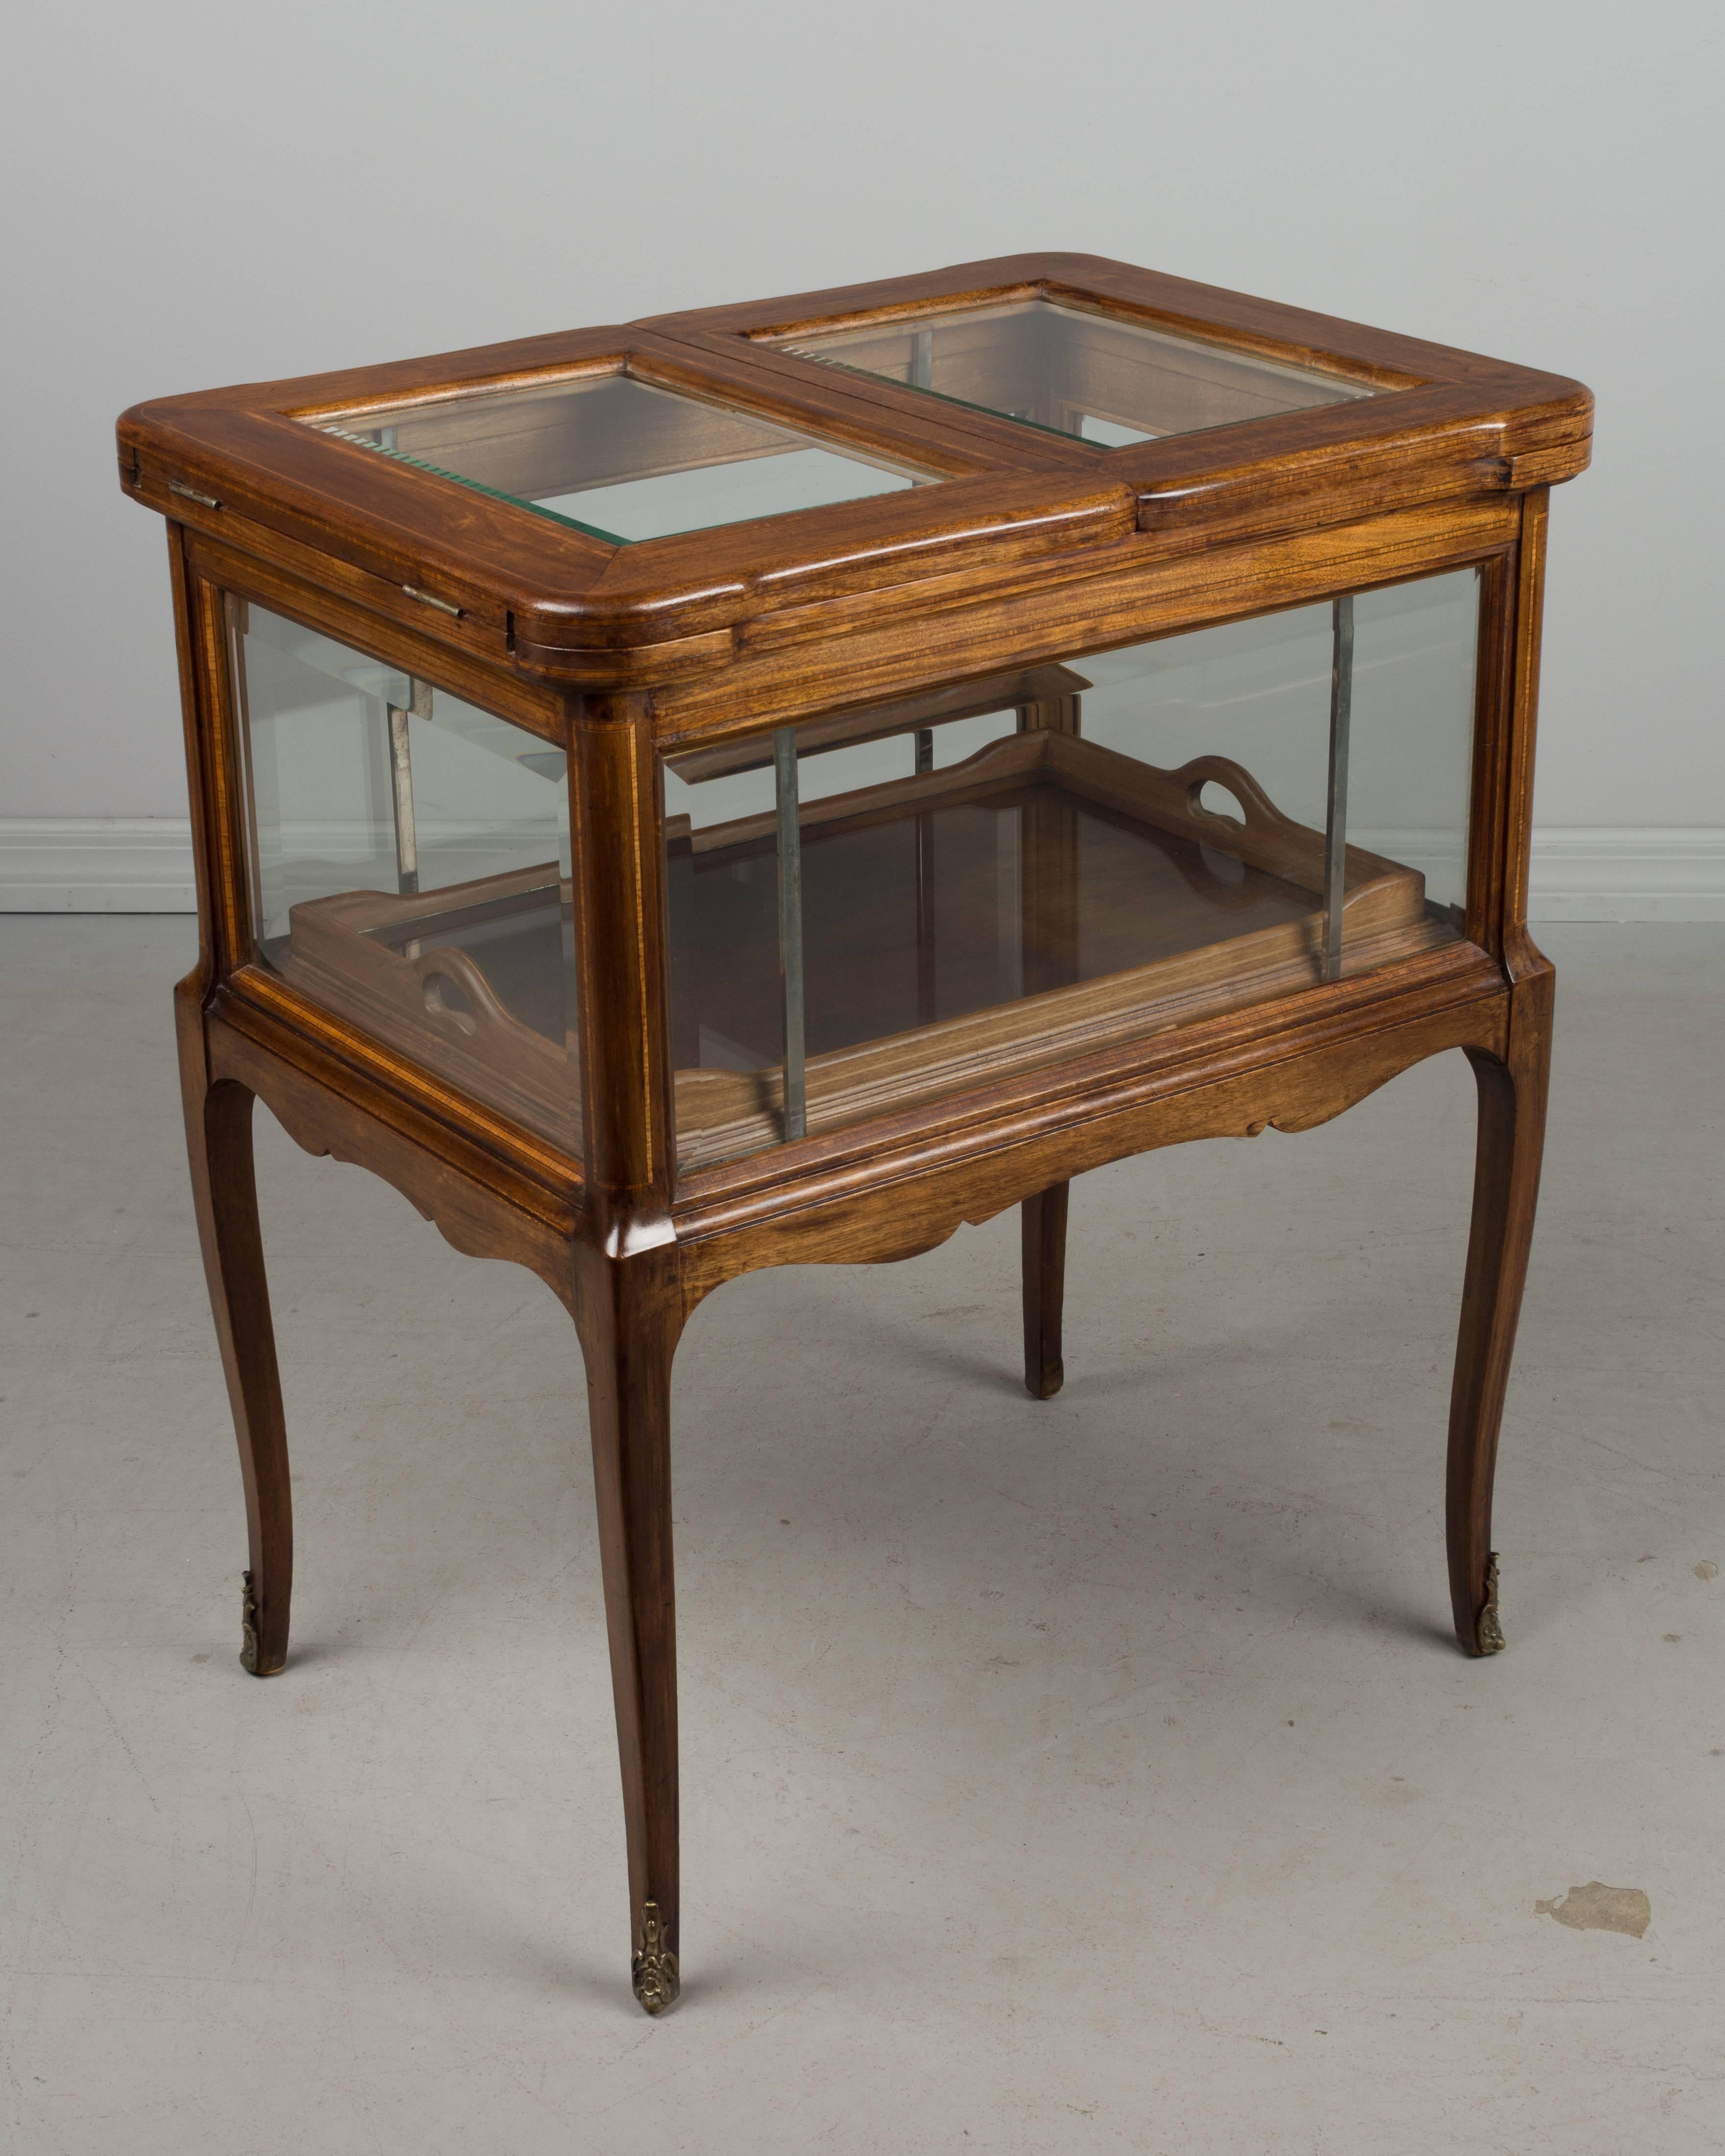 A midcentury French bar cabinet made of mahogany with beveled glass and marquetry inlay. Unusual design with a mechanism that raises the bottom interior when the top is hinged open. A removable glass serving tray with wood frame rests inside ready